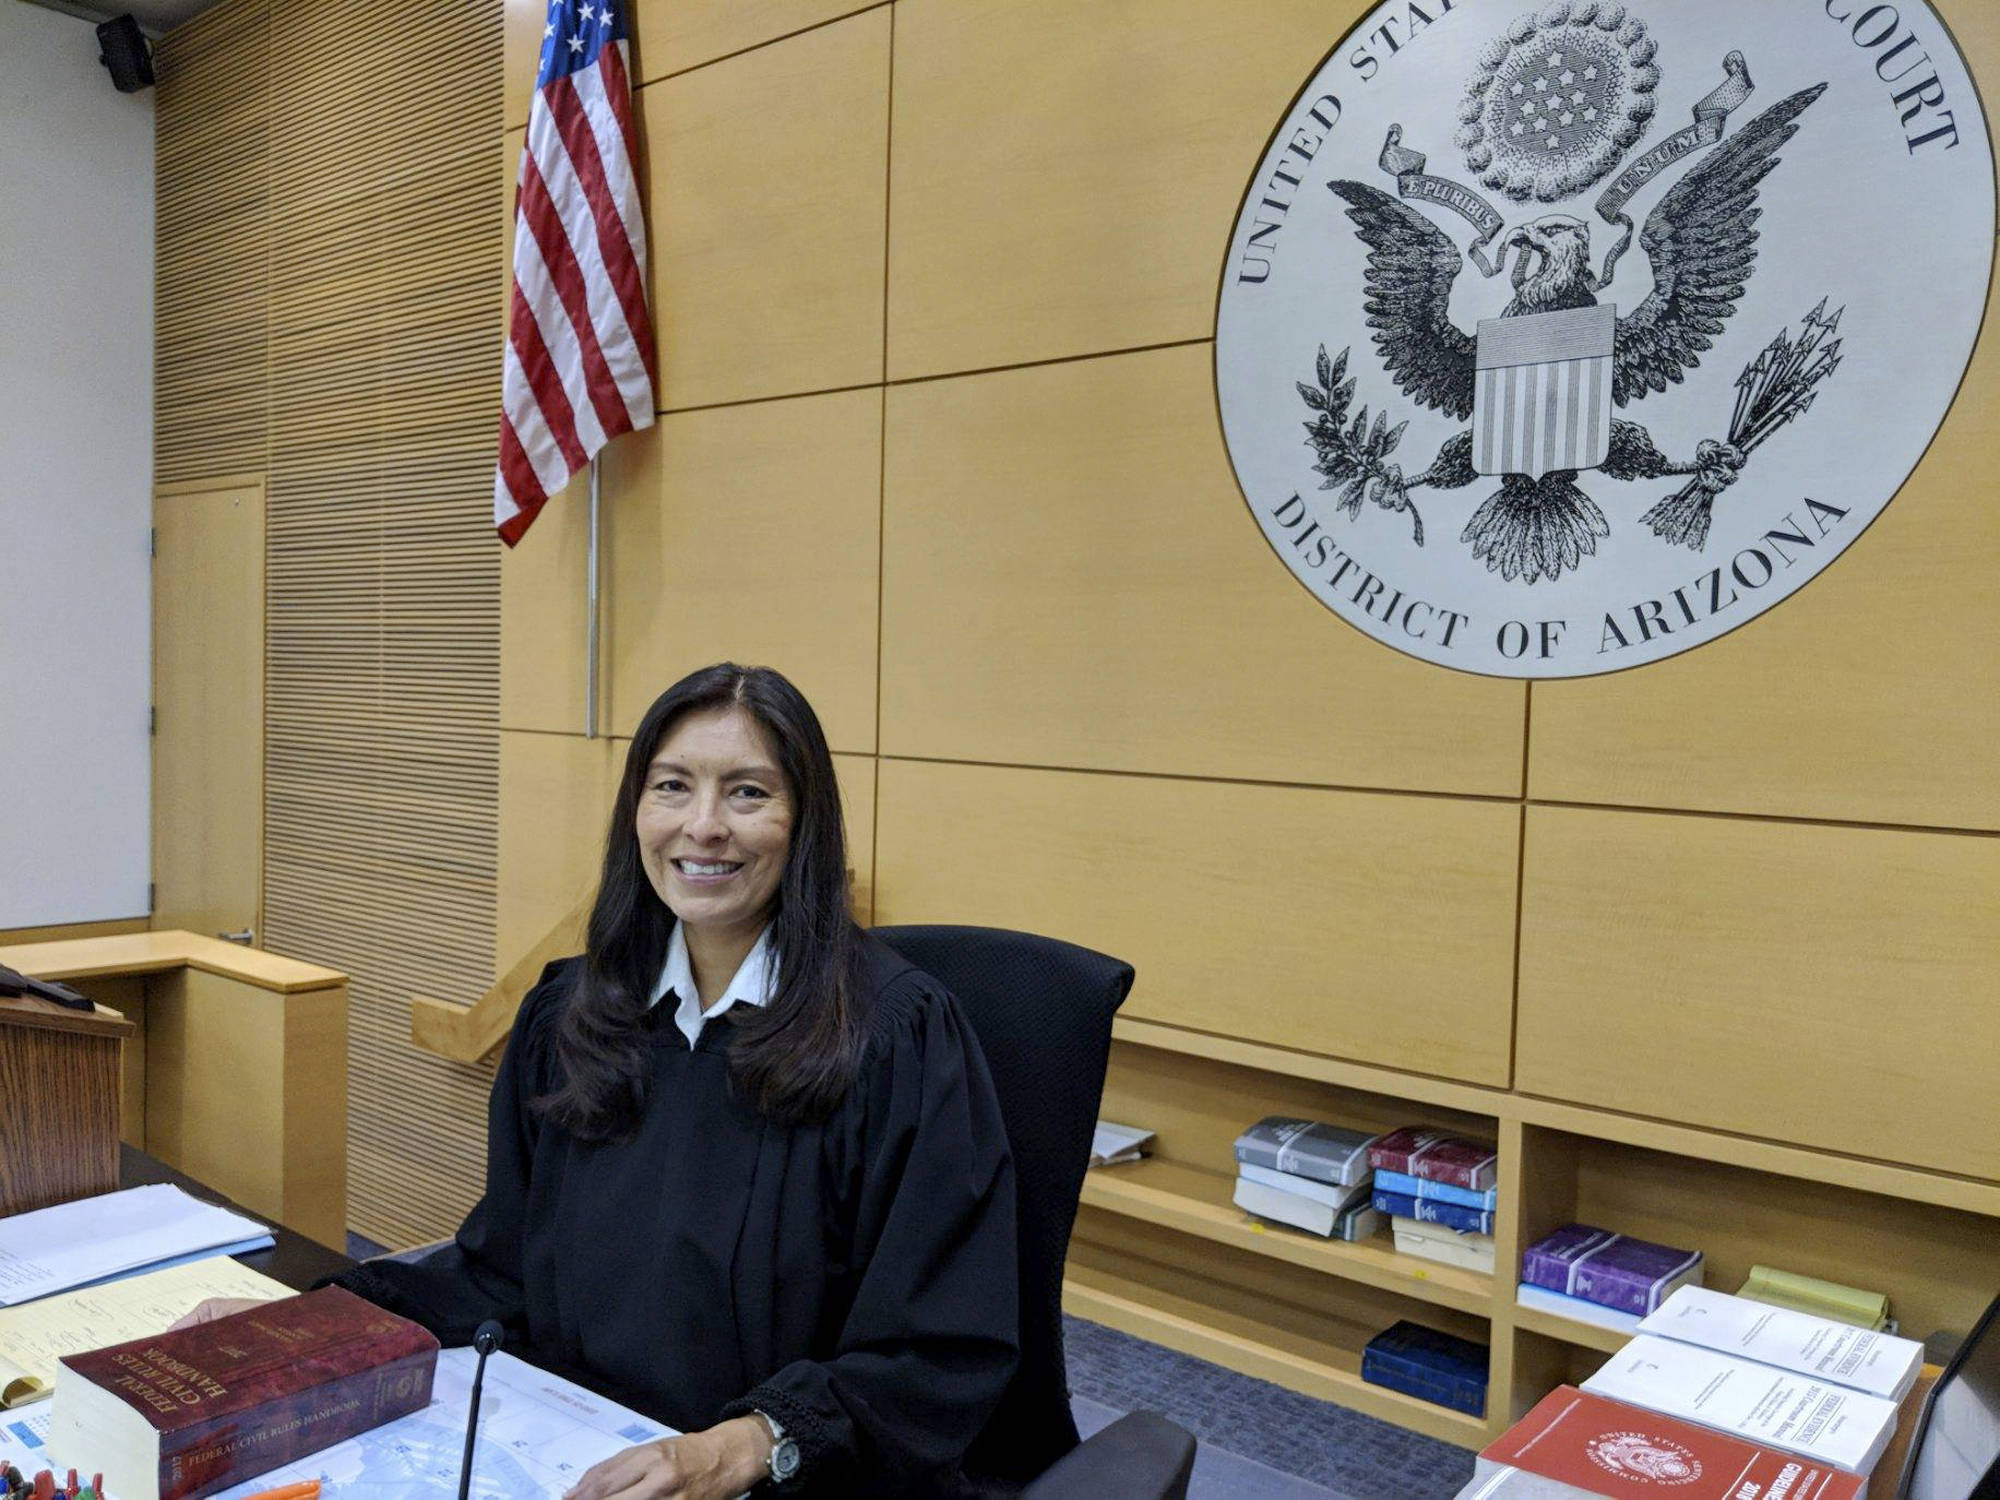 Native American judge blazes trail in federal courts